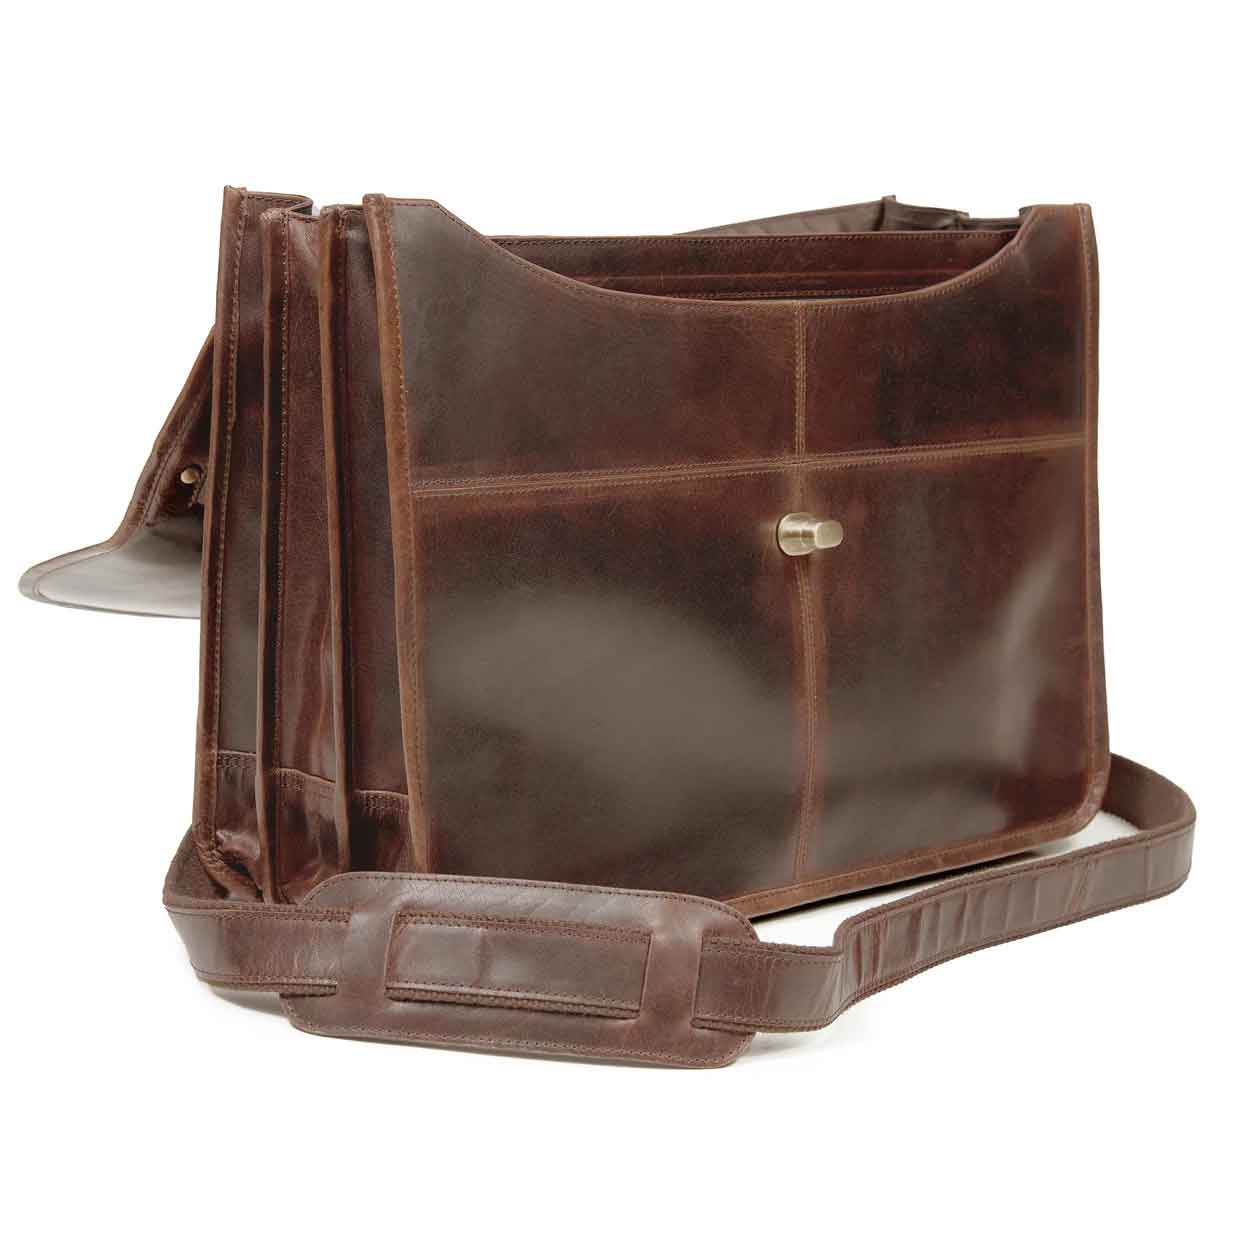 Product image for Irish Bag | Men's Brown Leather Luxury Briefcase